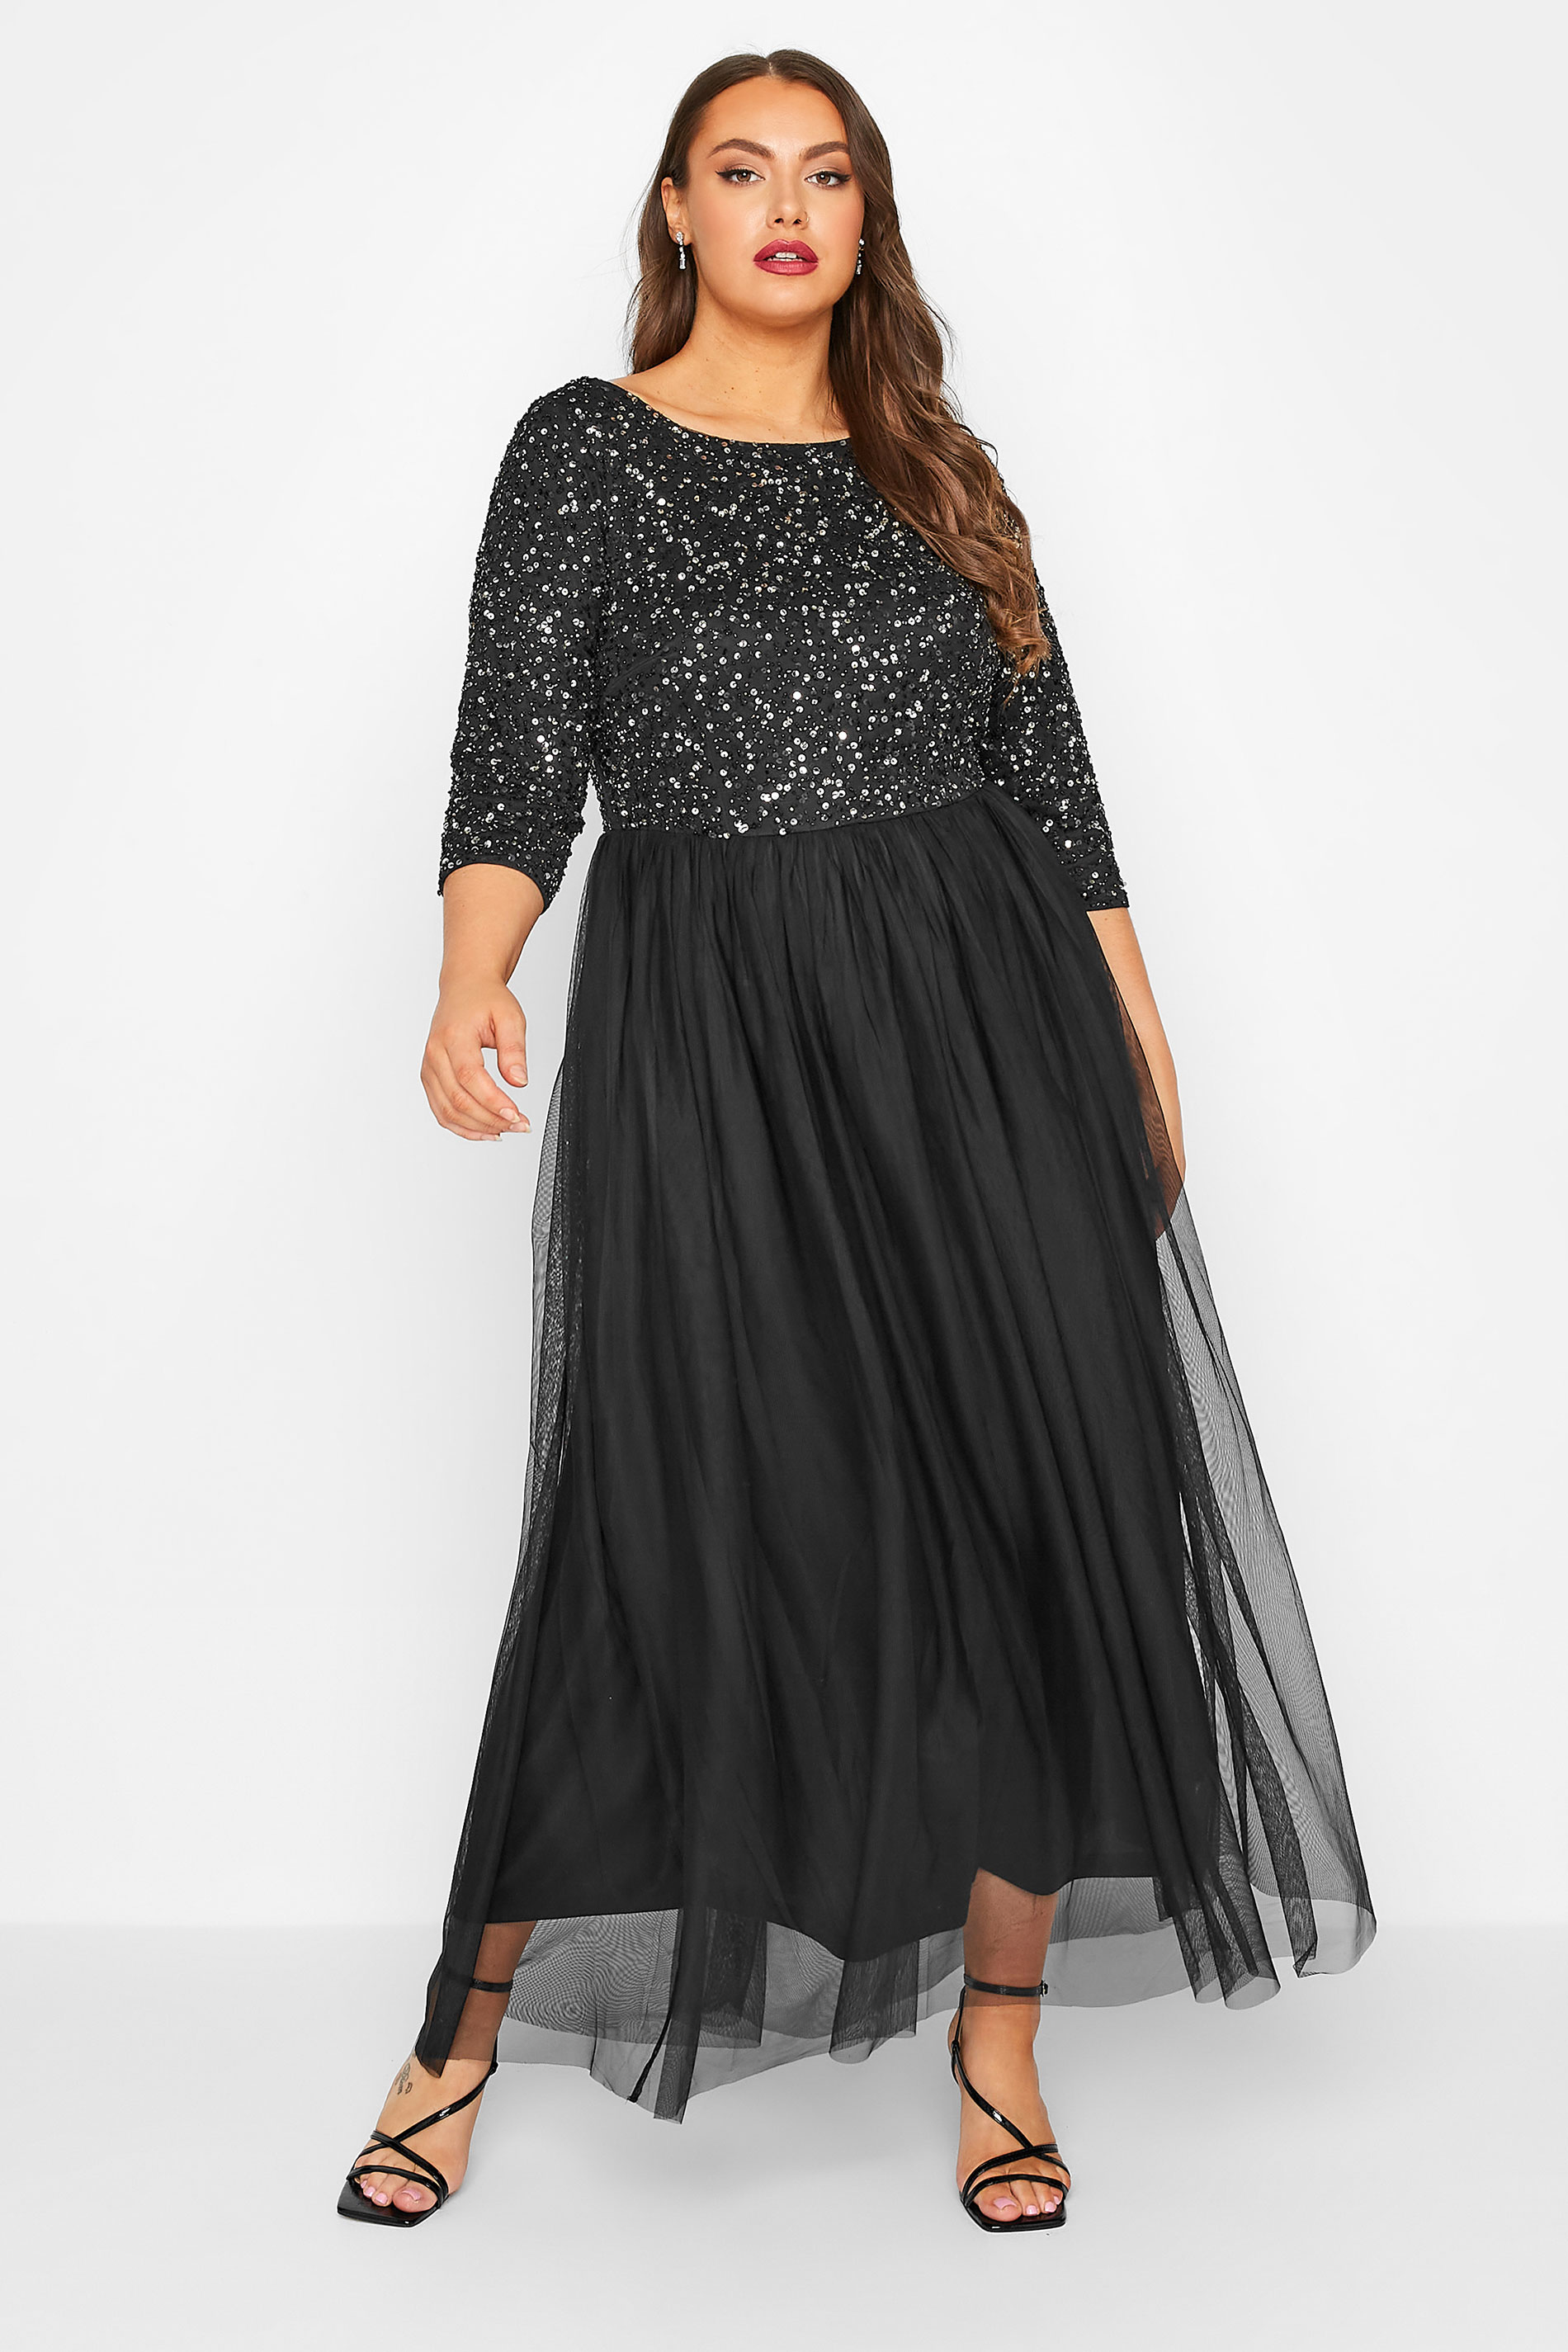 LUXE Plus Size Black Sequin Hand Embellished Maxi Dress | Yours Clothing 2